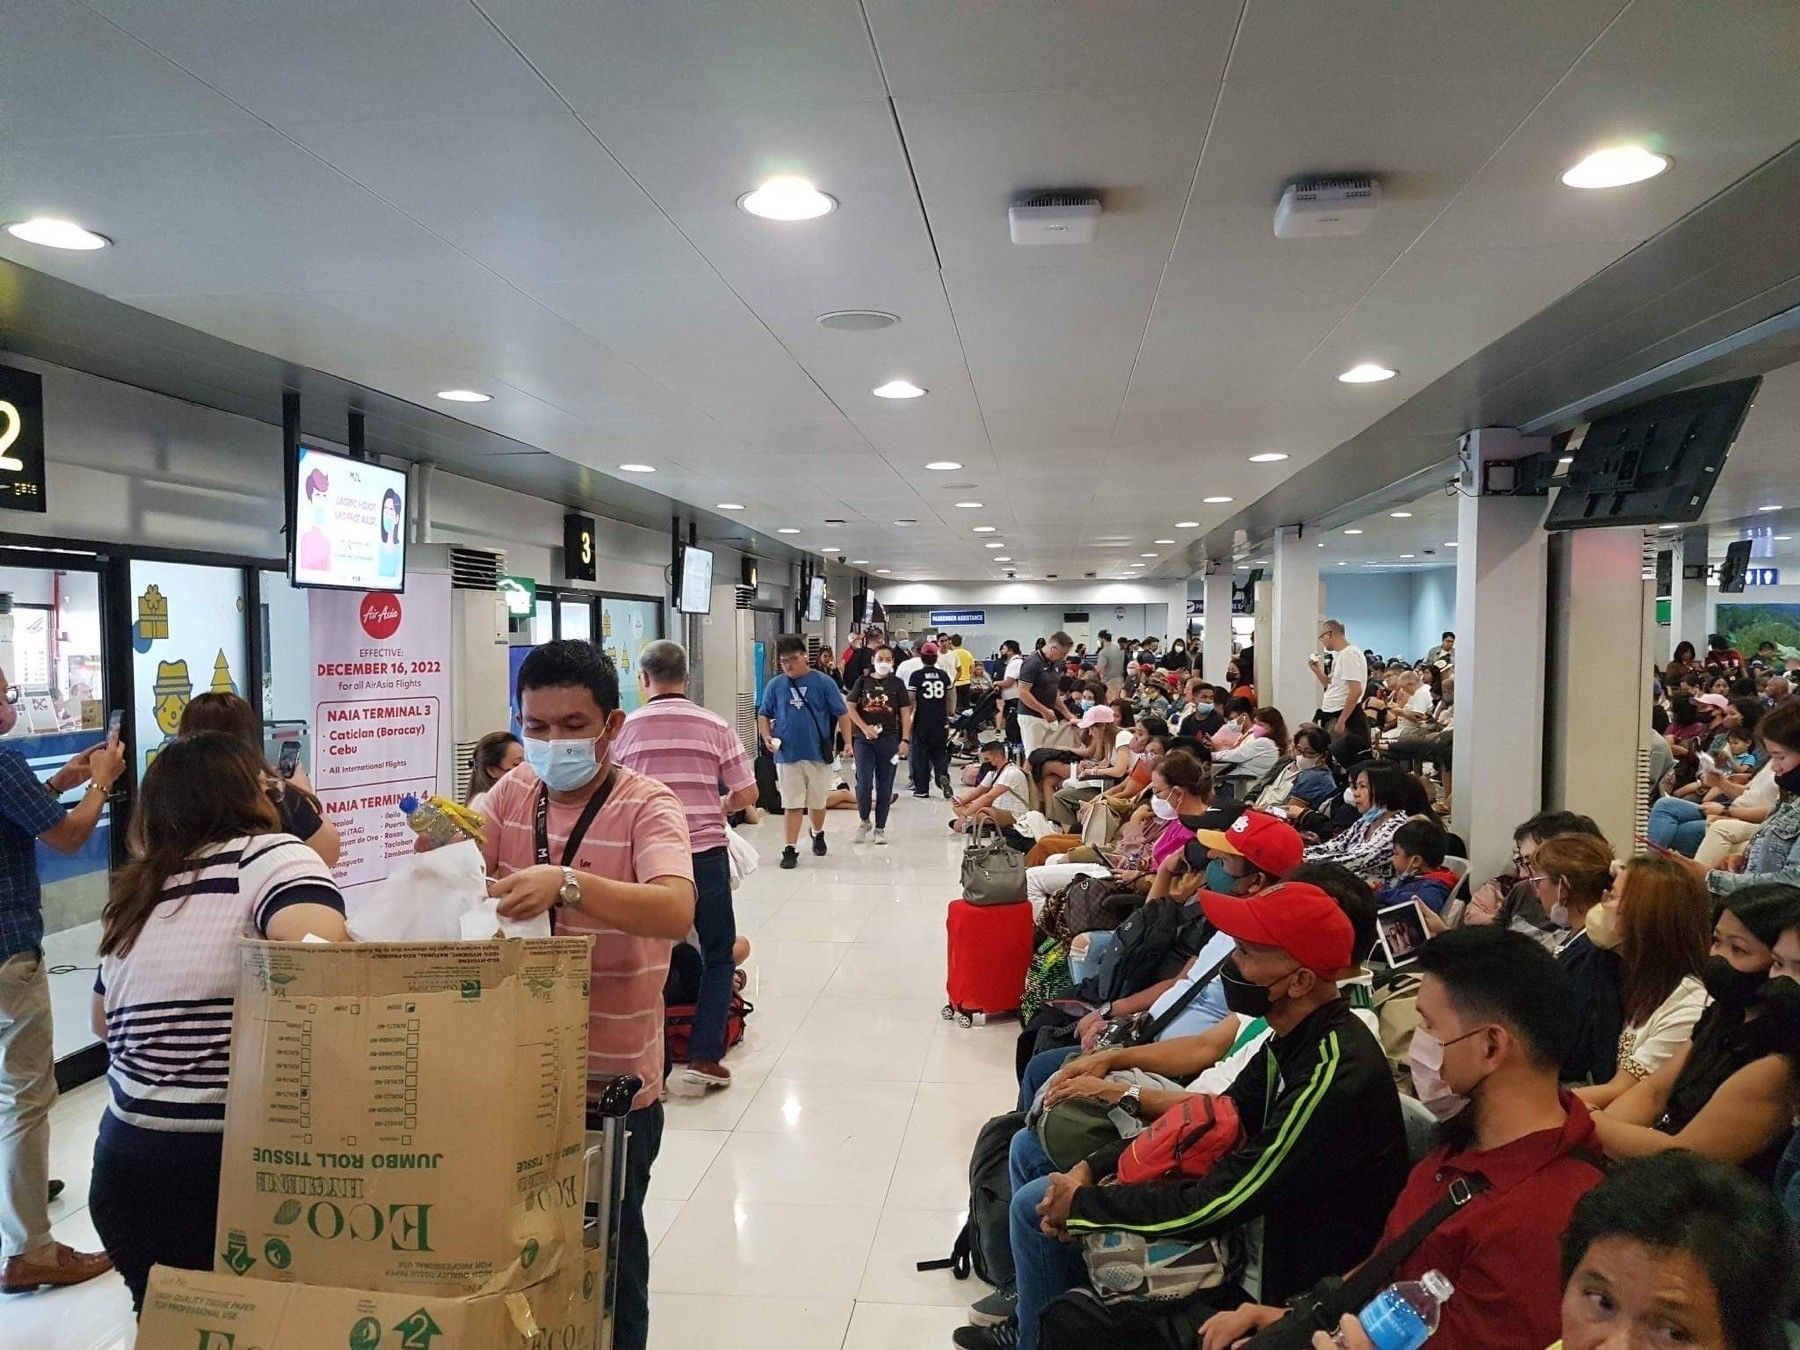 New Year's Day technical issues that marred the Civil Aviation Authority of the Philippines' air traffic system affected around 56,000 passengers as flights were put on hold on January 1, 2023.